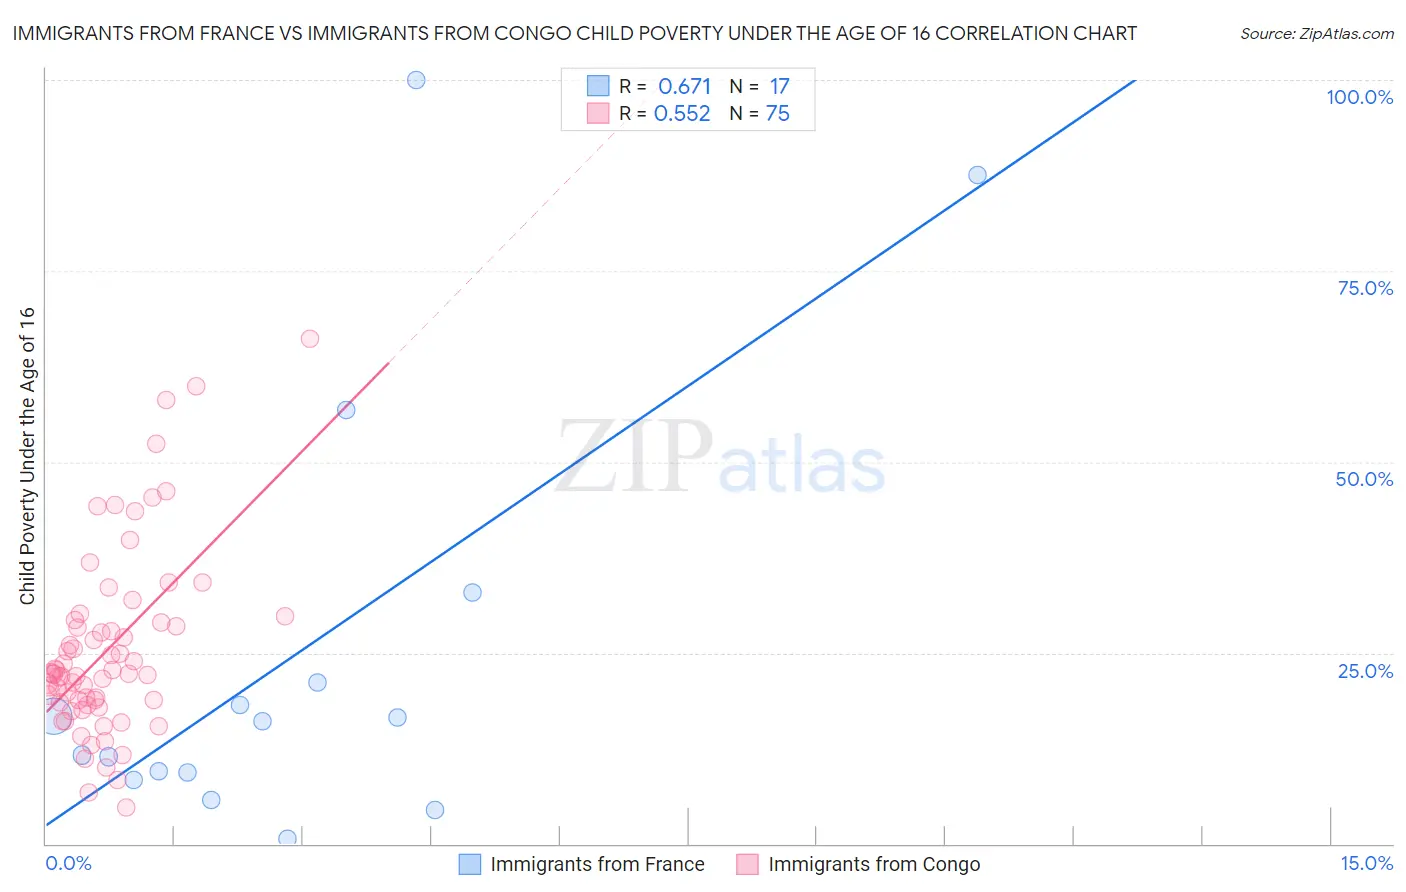 Immigrants from France vs Immigrants from Congo Child Poverty Under the Age of 16